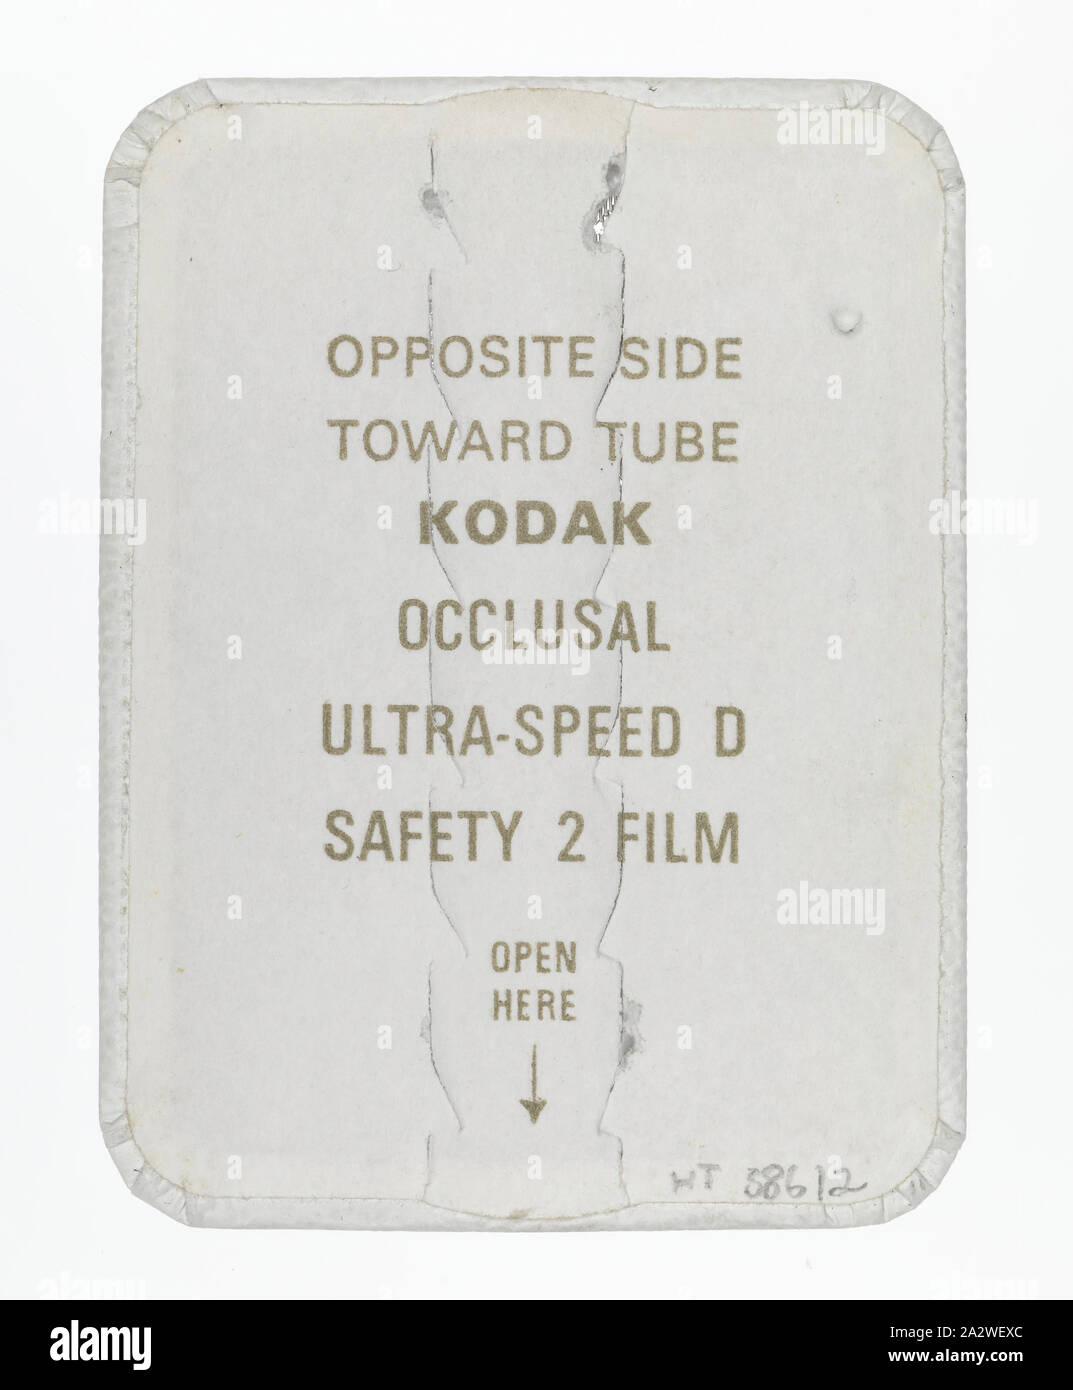 Dental Film - Kodak Australasia Pty Ltd, ' Occlusal Ultra-Speed D Safety 2 Film', Kodak Occlusal Ultra-Speed D Safety 2 Film. This product is part of the Kodak collection of products, promotional materials, photographs and working life artefacts, when the Melbourne manufacturing plant at Coburg closed down. manufactured and distributed a wide range of photographic products to Australasia, such as film, paper, chemicals, cameras Stock Photo